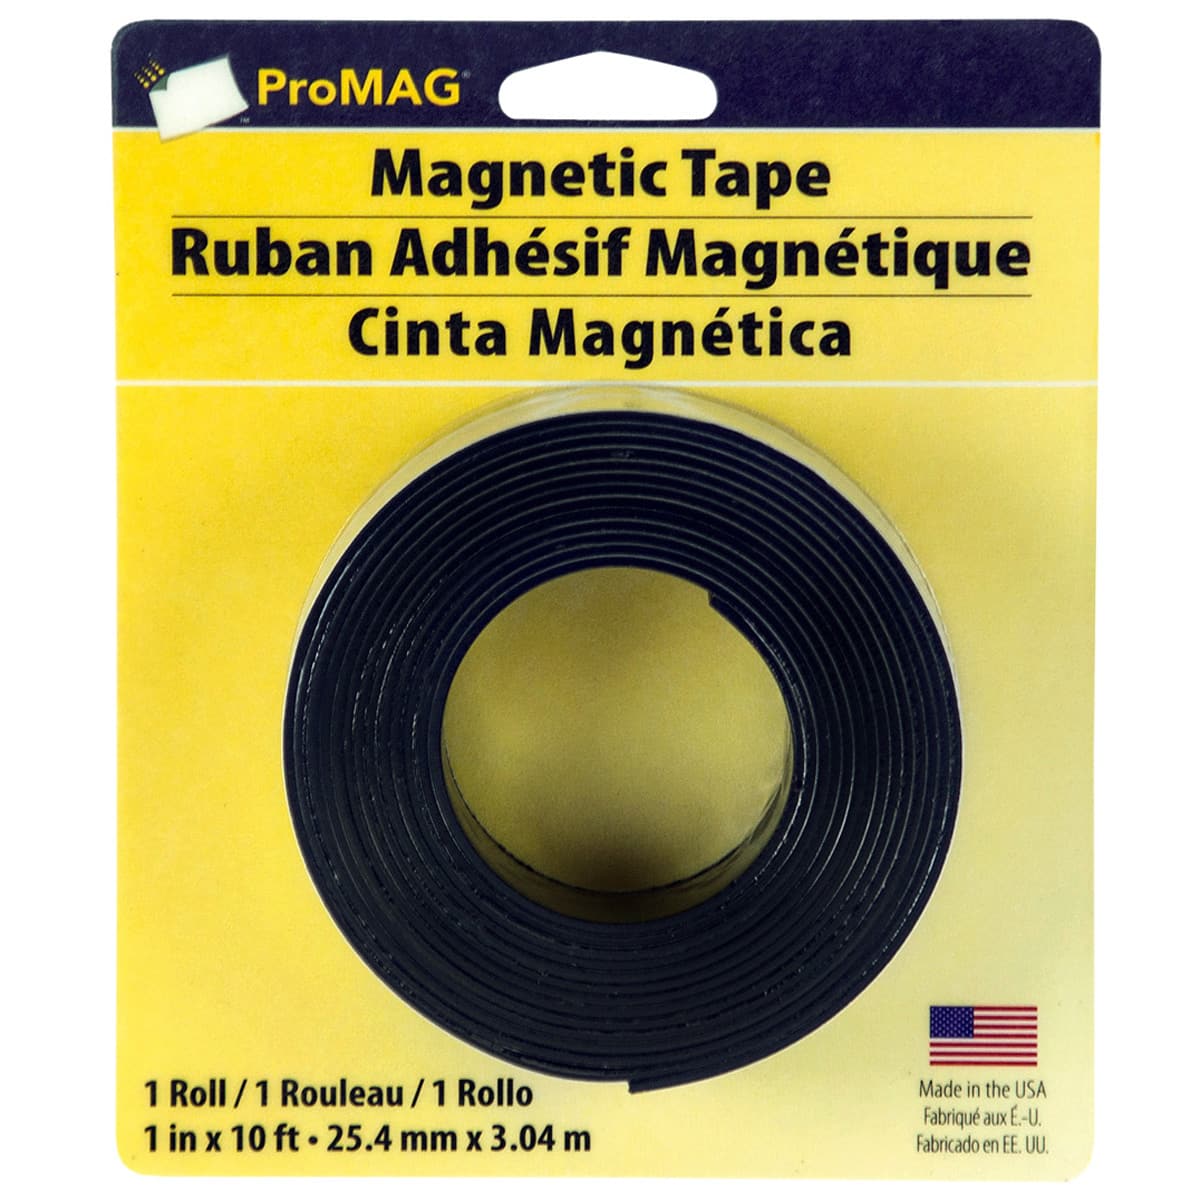 Magnetic tape - 10 m roll